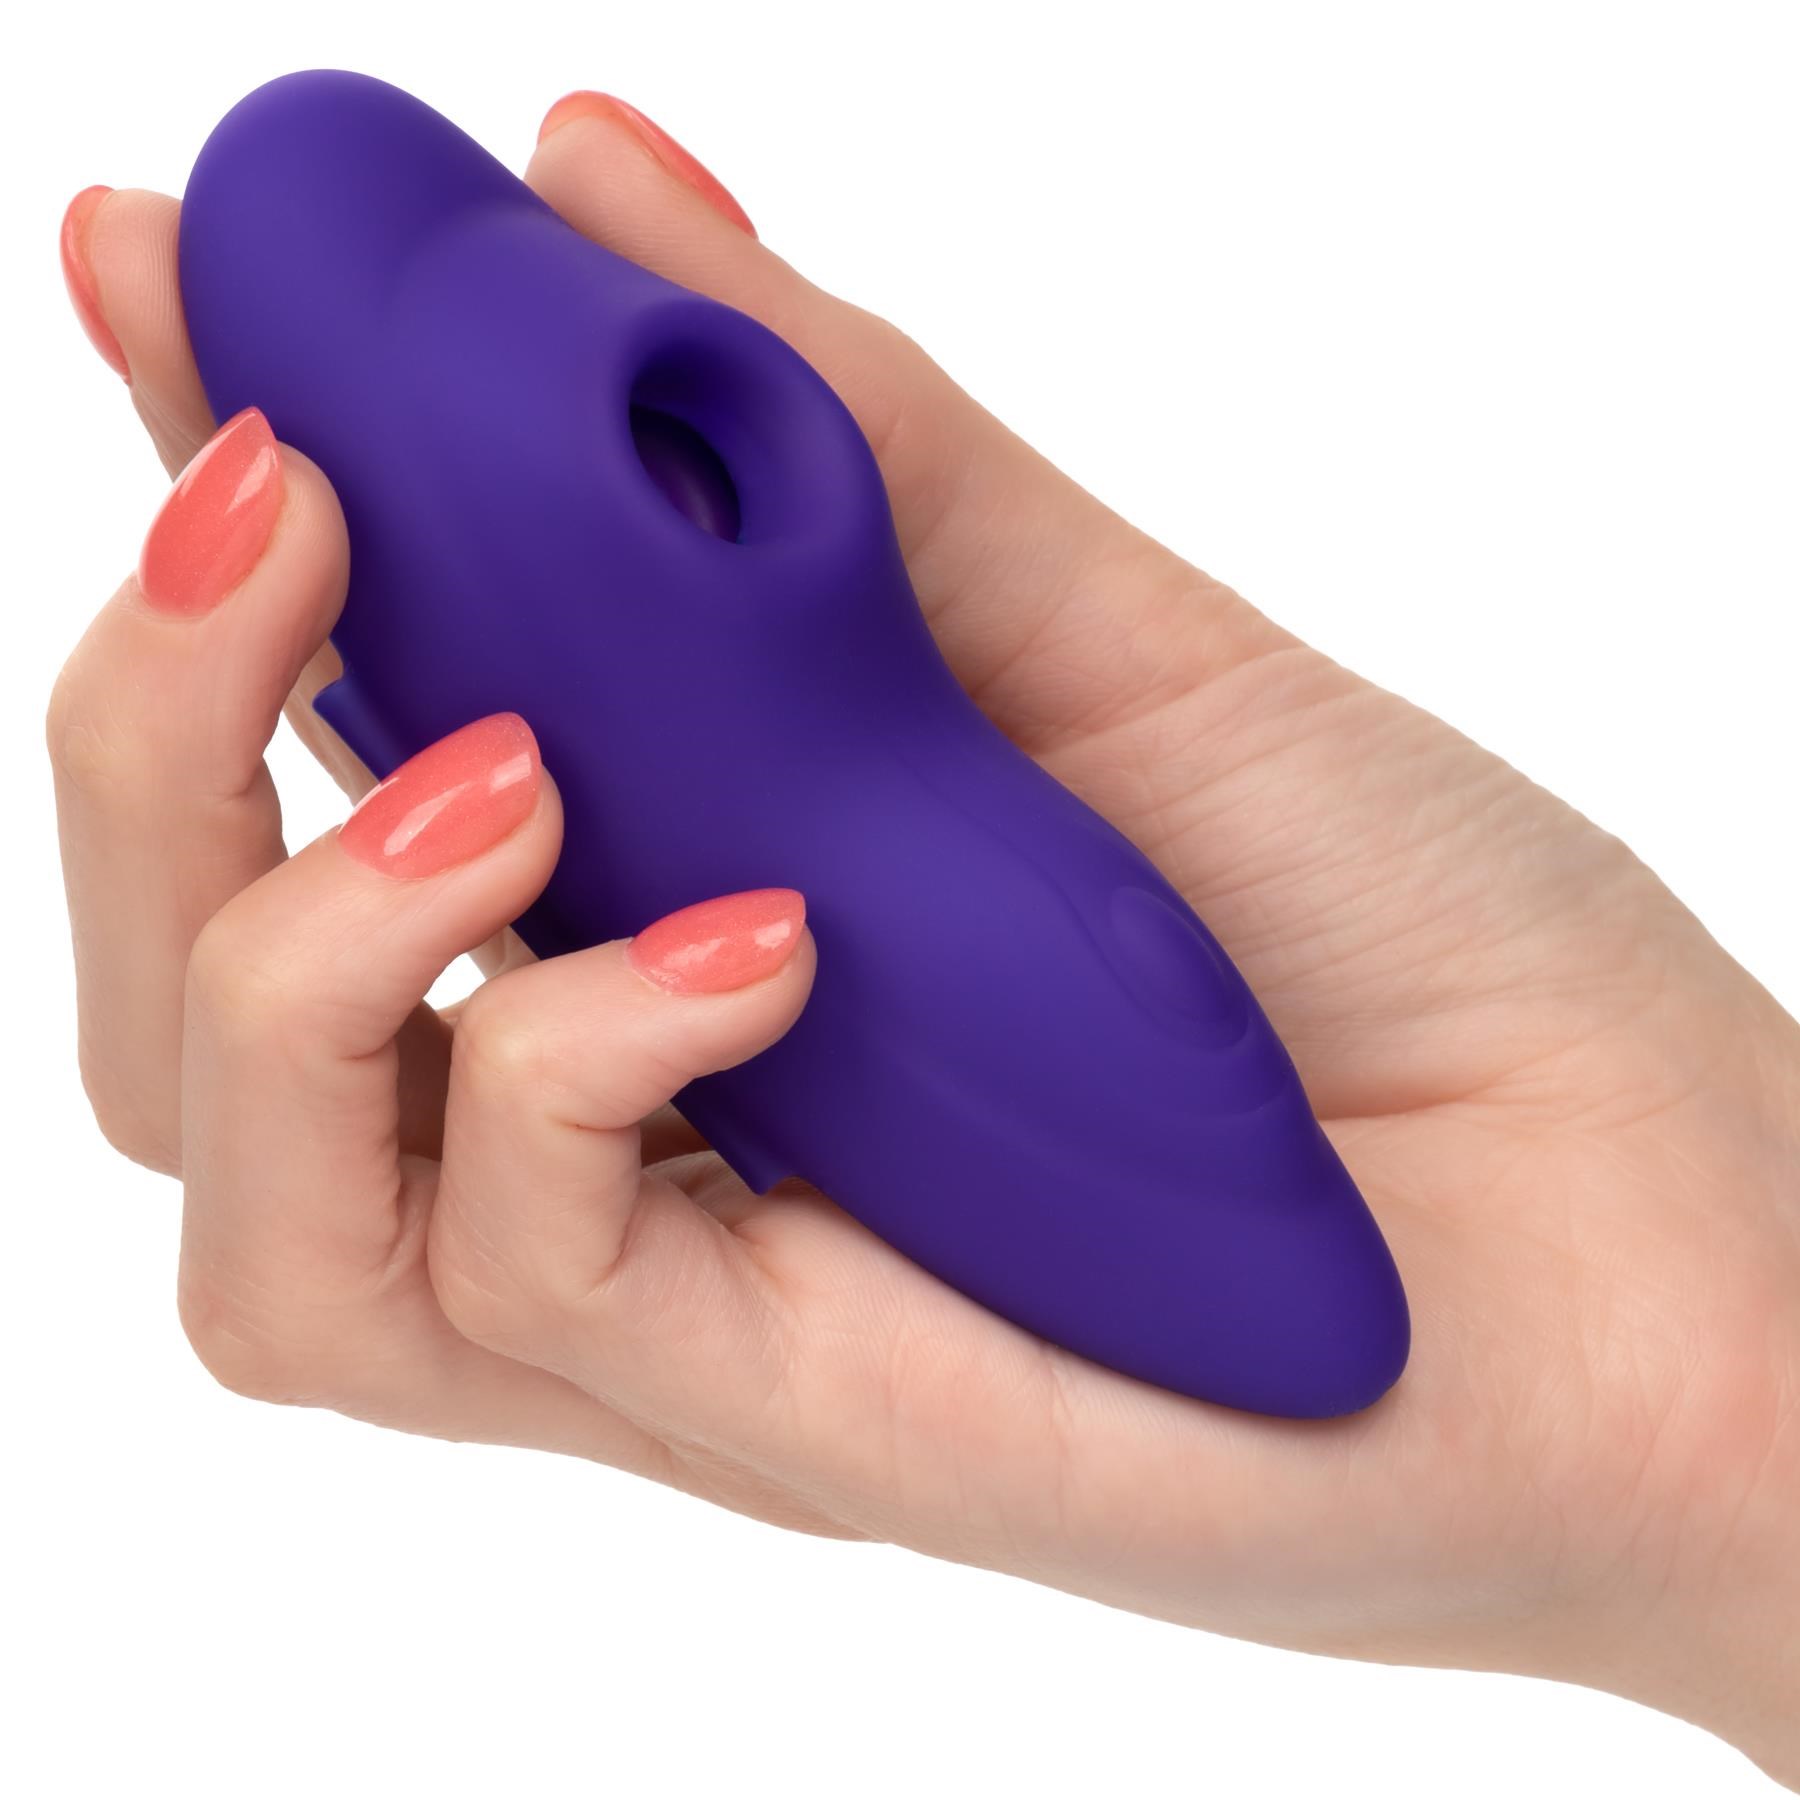 Lock-N-Play Remote Suction Panty Teaser - Hand Shot